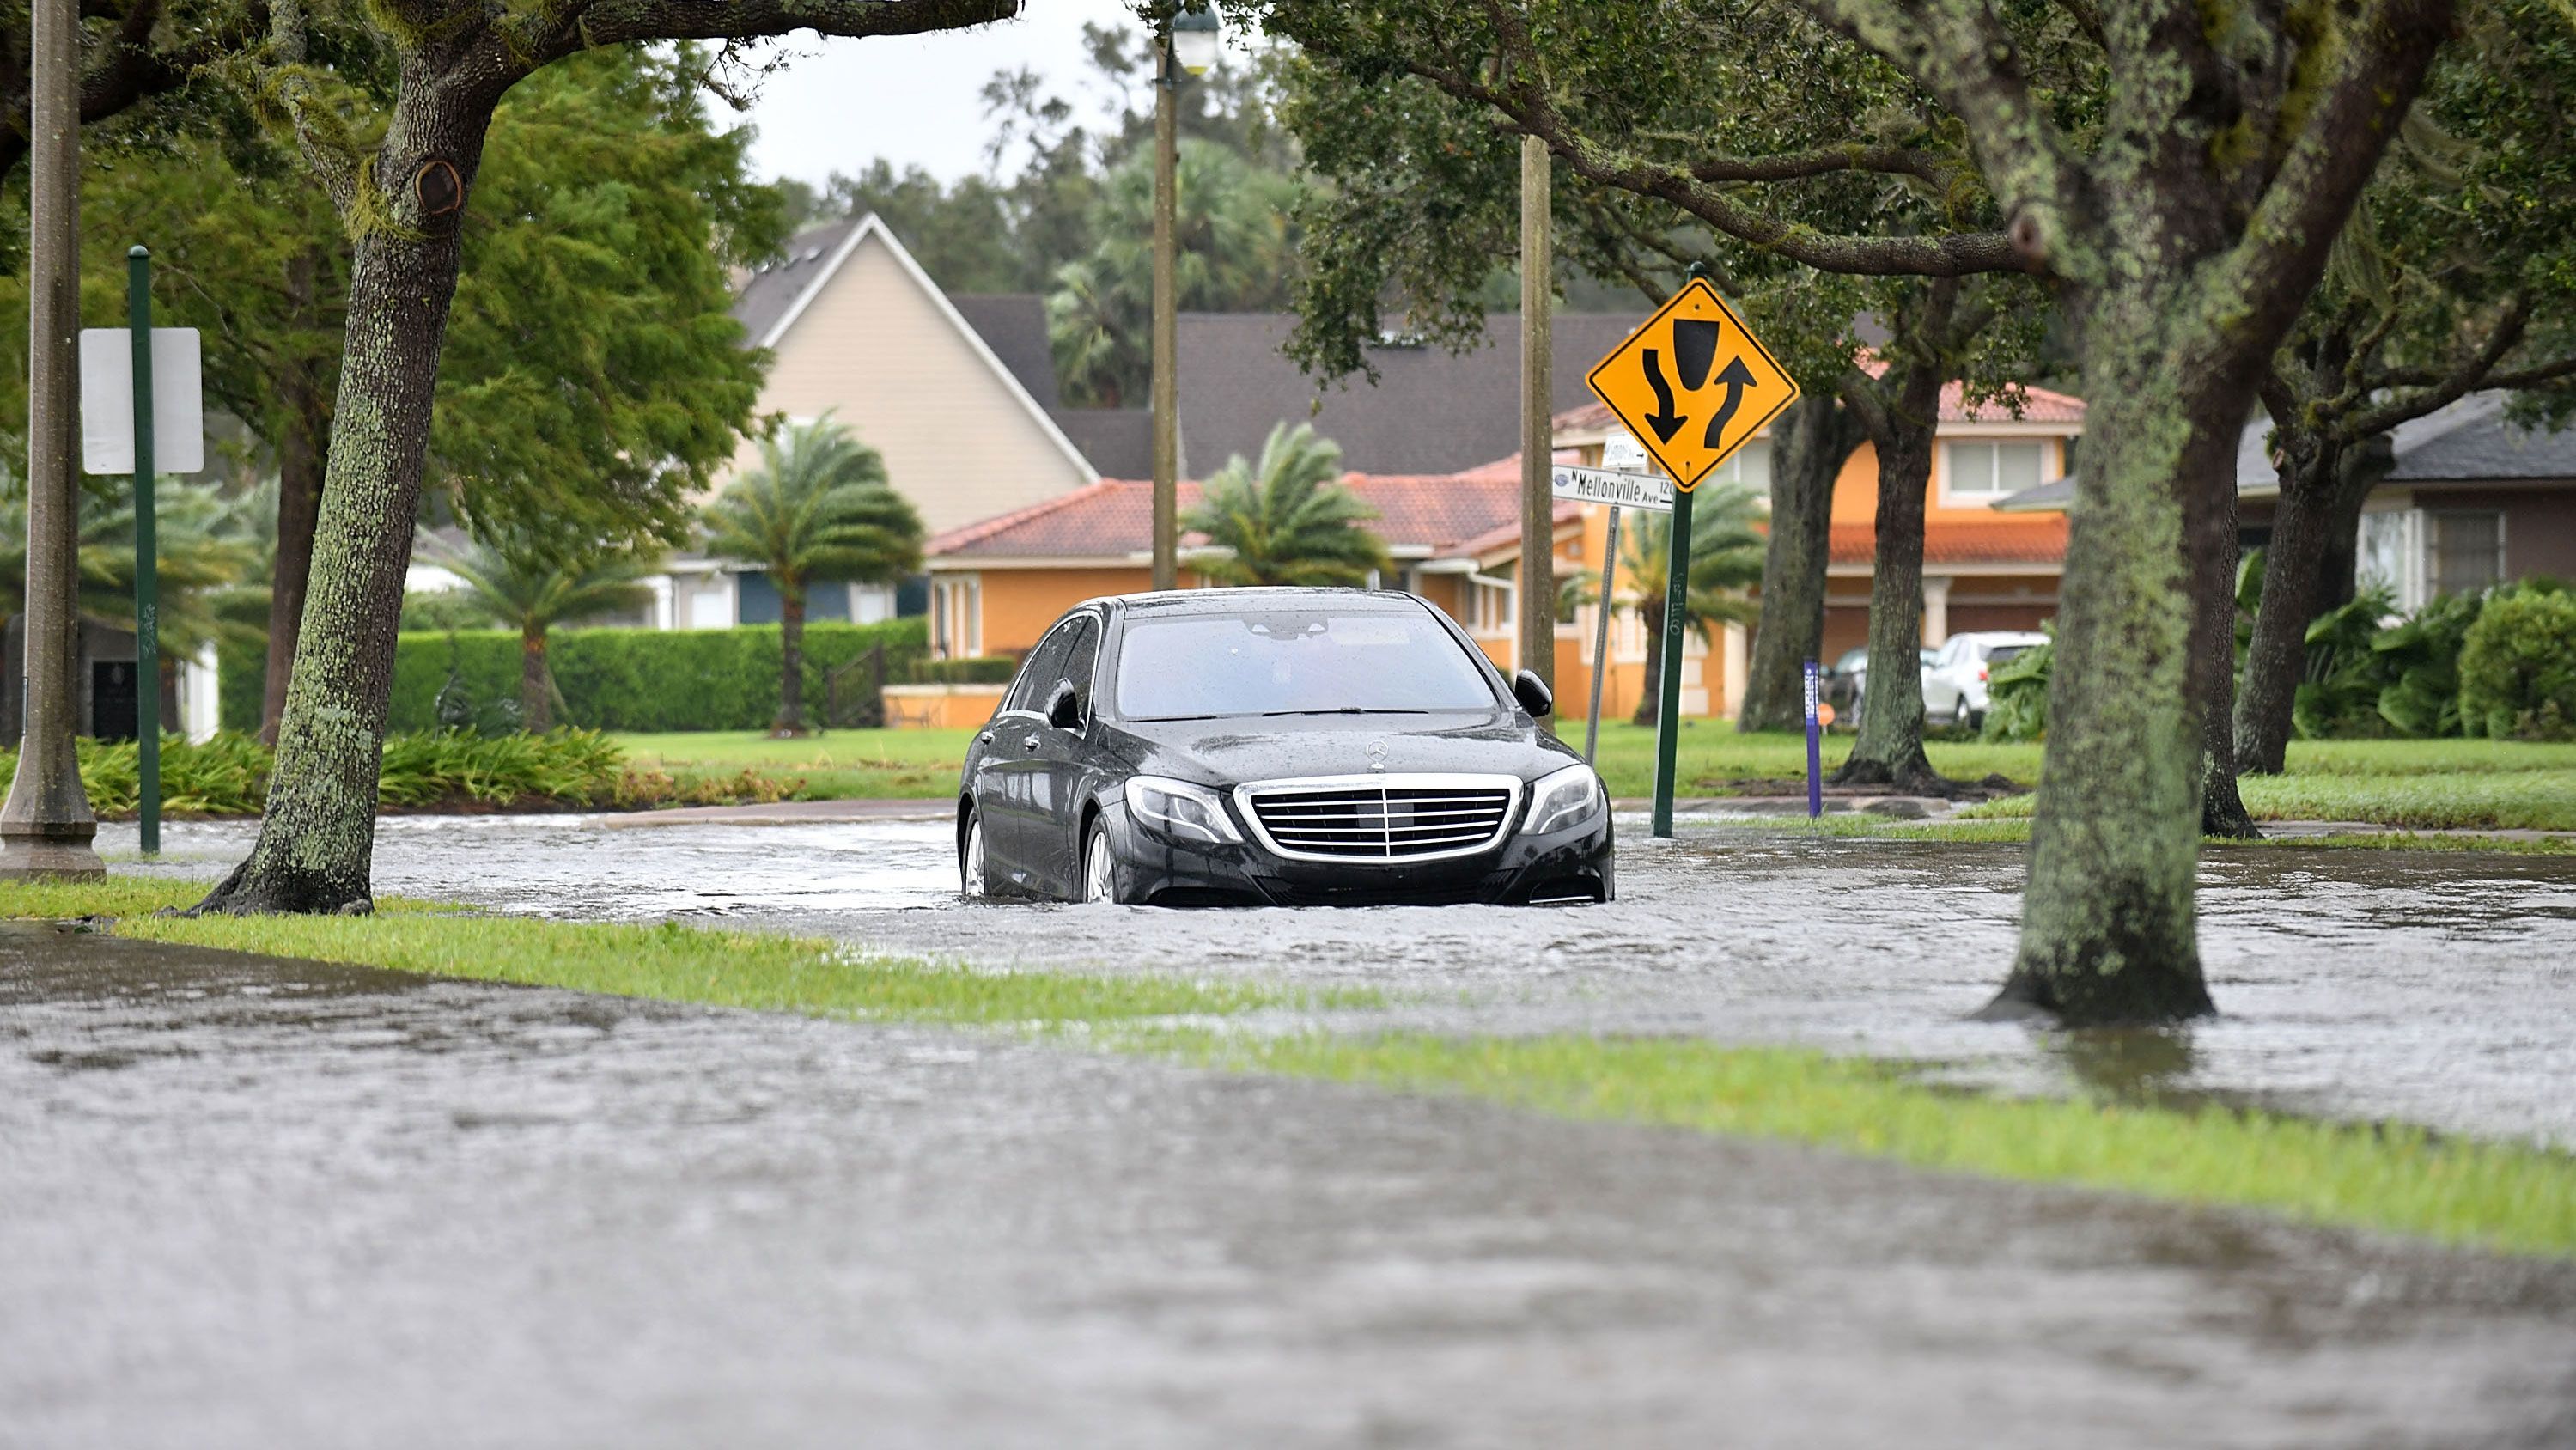 A car is seen in a flooded road after being hit by the winds and rain from Hurricane Ian on September 29, 2022 in Sanford, Florida, located in Seminole County.